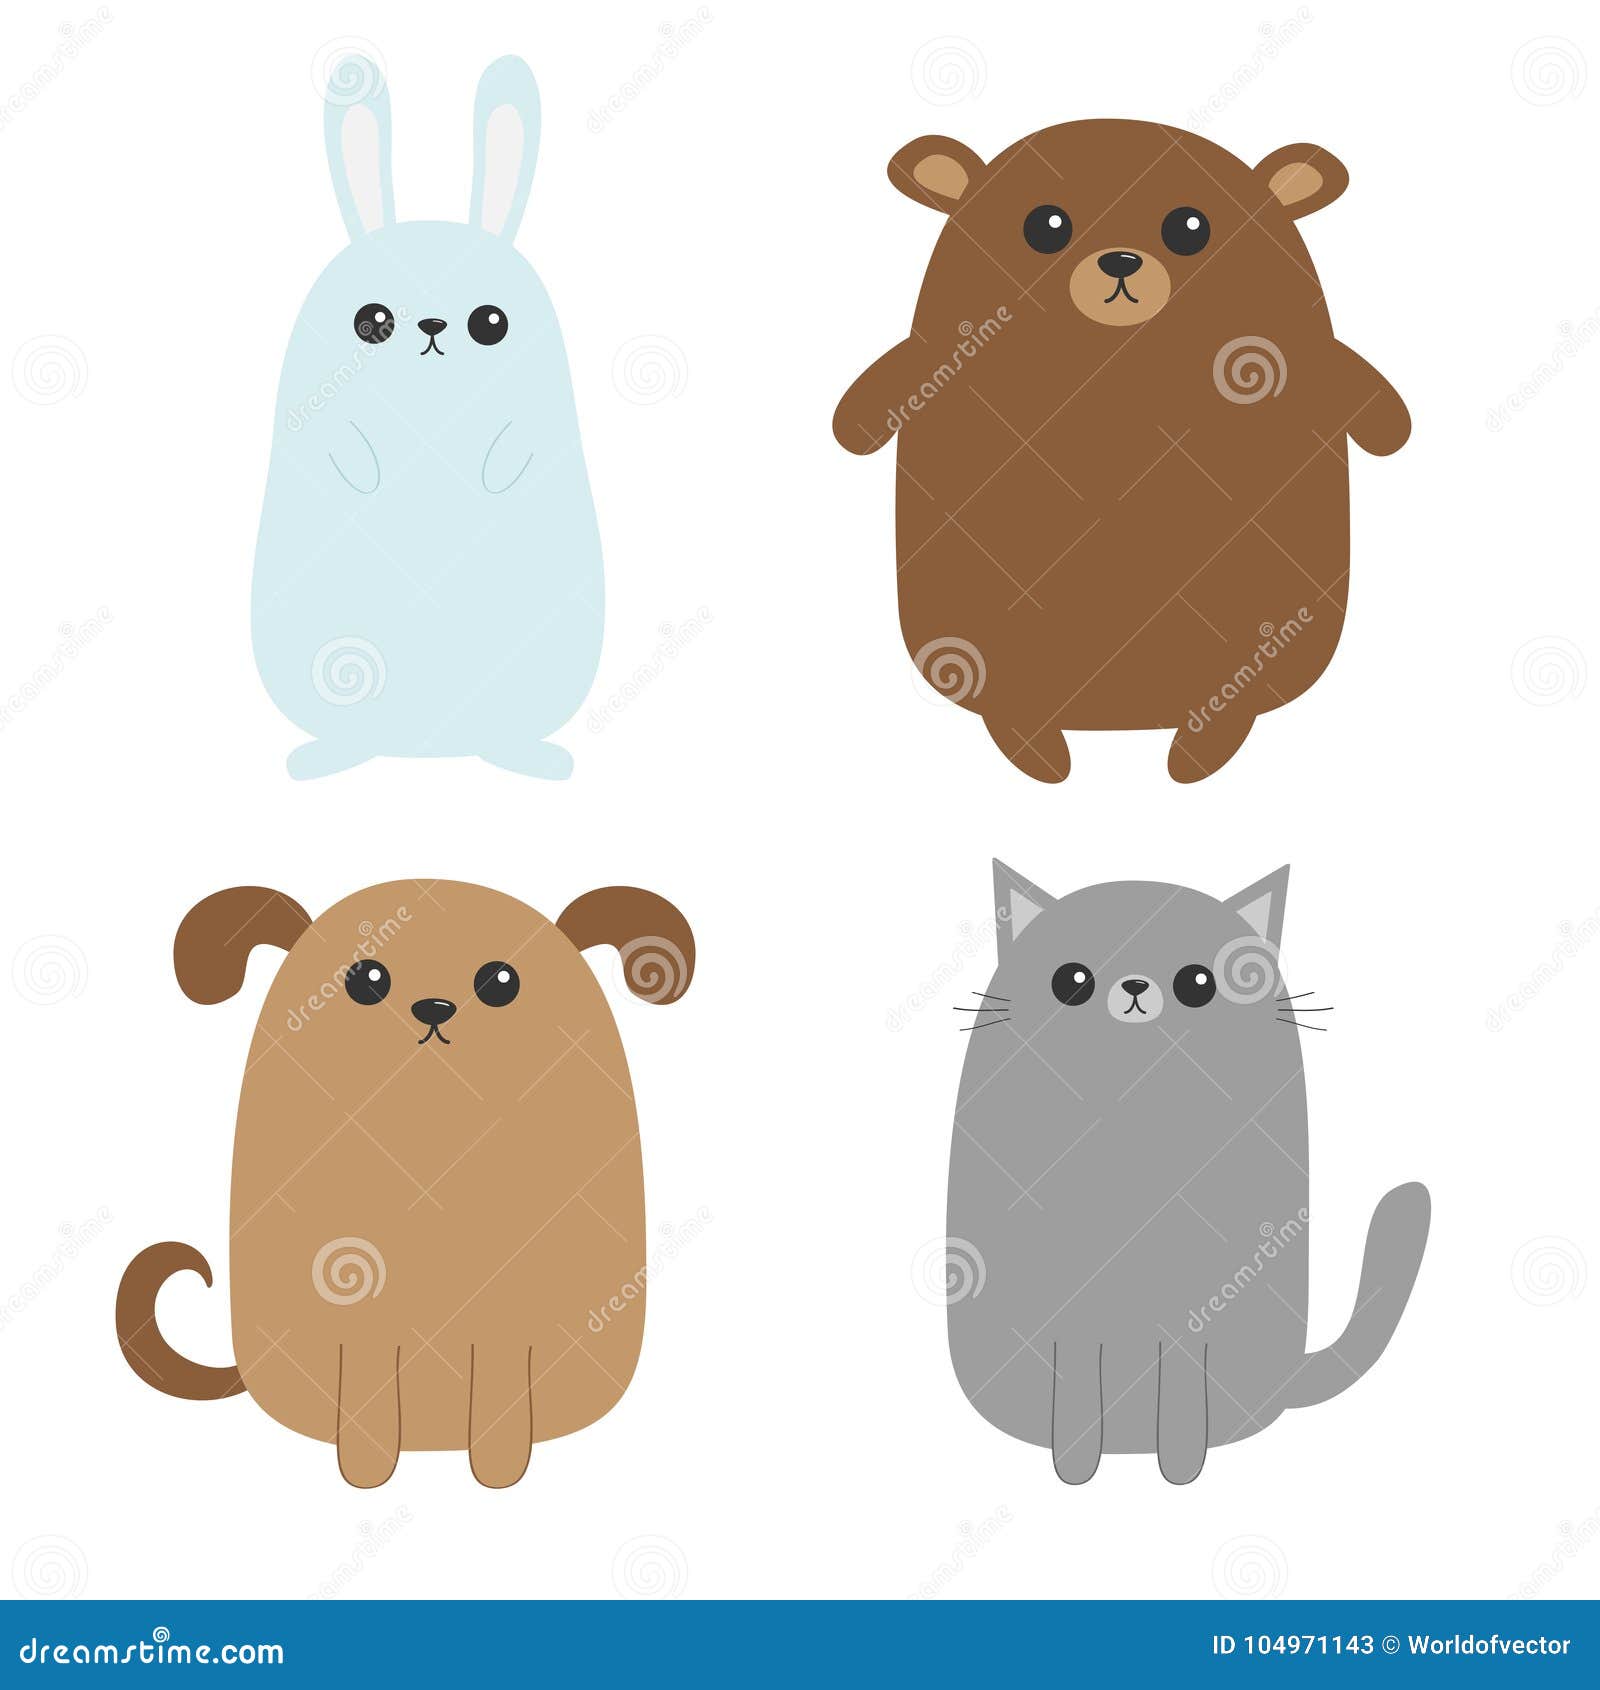 Cartoon Dog, Cat, Bear Grizzly, Rabbit Hare Icon. Puppy Kitten. Kawaii Pet  Forest Animal. Mustache Whisker Tail Stock Vector - Illustration of face,  hare: 104971143